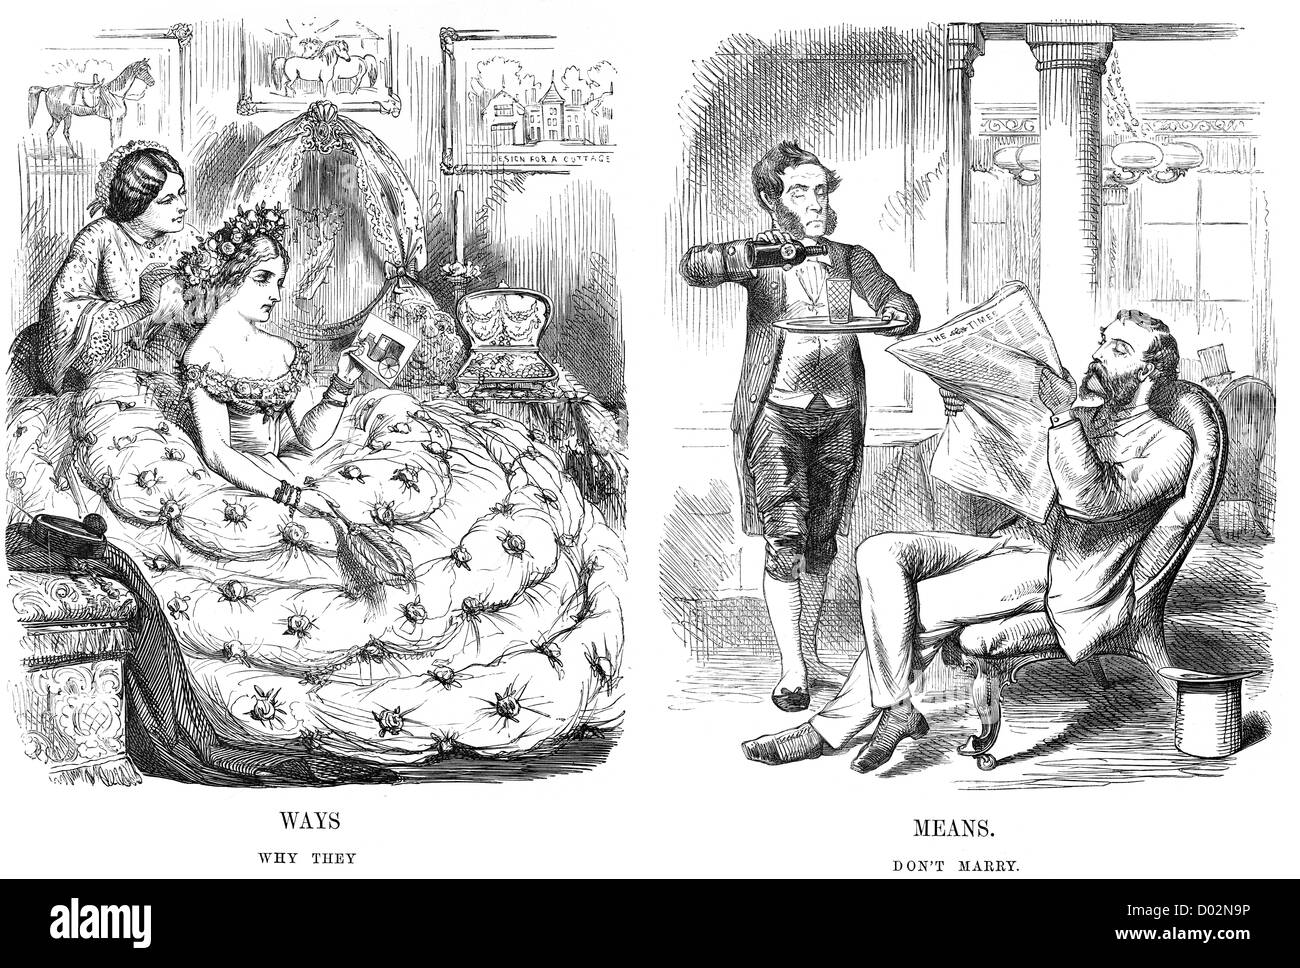 Ways Means - Why They Don't Marry. Political cartoon about marriage in Victorian Britain, 1860 Stock Photo